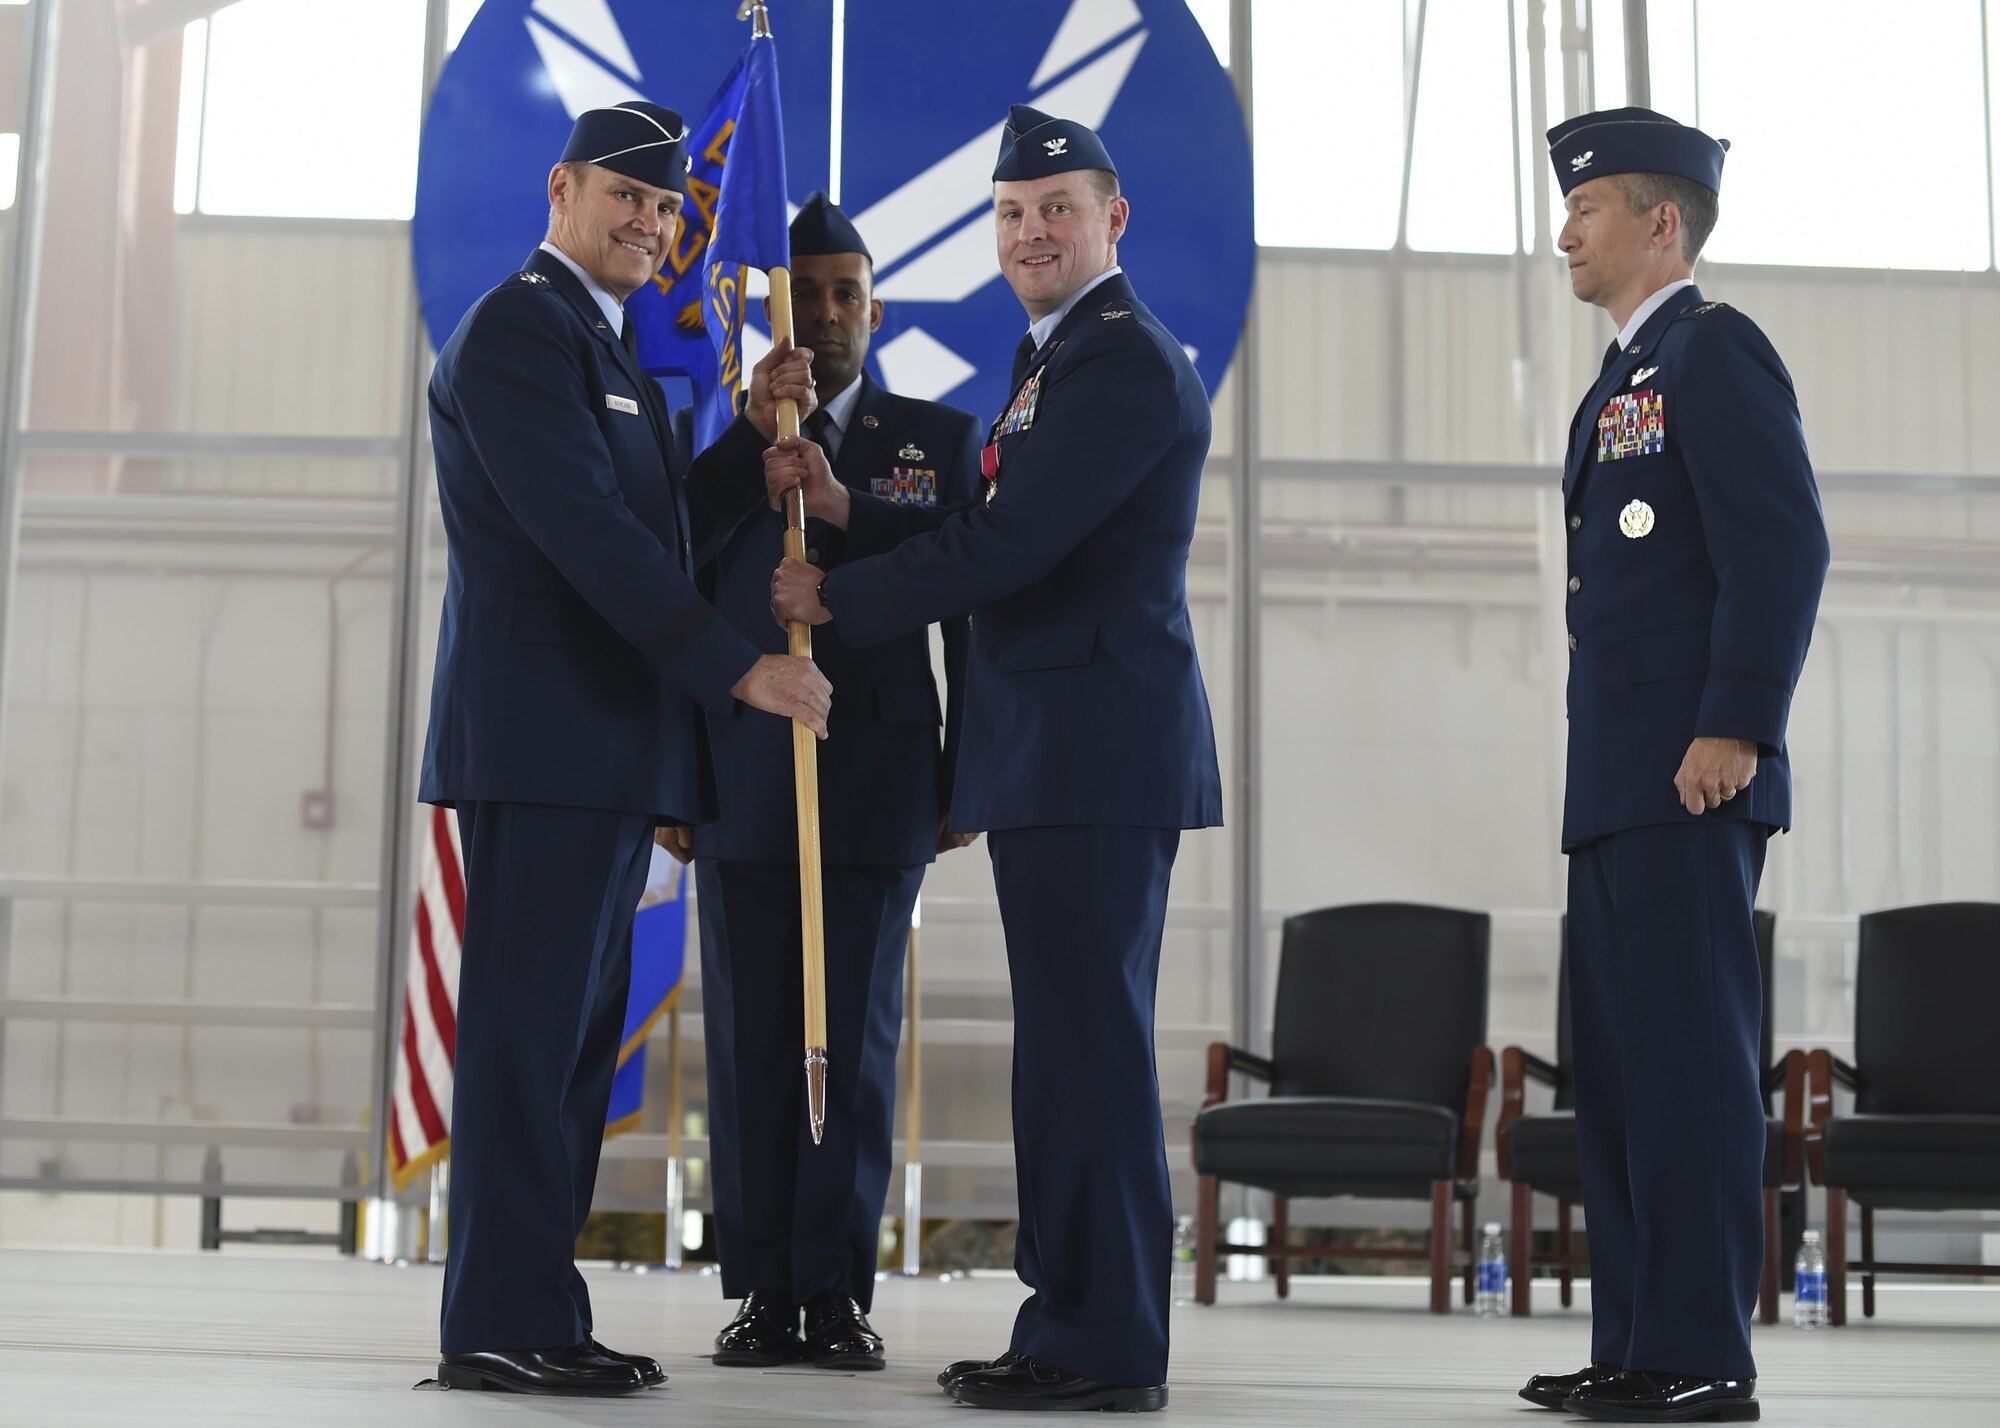 Lt. Gen. Mark Nowland the 12th Air Force commander receives the 49th Wing gidon from Col. Robert Kiebler during a change-of-command ceremony July 15 at Hangar 500 at Holloman Air Force Base N.M. Col. Houston Cantwell assumed command of the 49th Wing and Holloman Air Force Base from the previous commander, Col. Robert Kiebler. As commander of the 49th Wing, Cantwell will lead Holloman’s mission to provide combat-ready Airmen, train MQ-1 Predator and MQ-9 Reaper pilots and sensor operators, and hosts the 54th Fighter Group's F-16 Fighting Falcon pilot training mission, the 96th Test Group's high-speed test track mission and the German Air Force Flying Training Center. (U.S. Air Force Photo by: Staff Sgt. Stacy Moless)